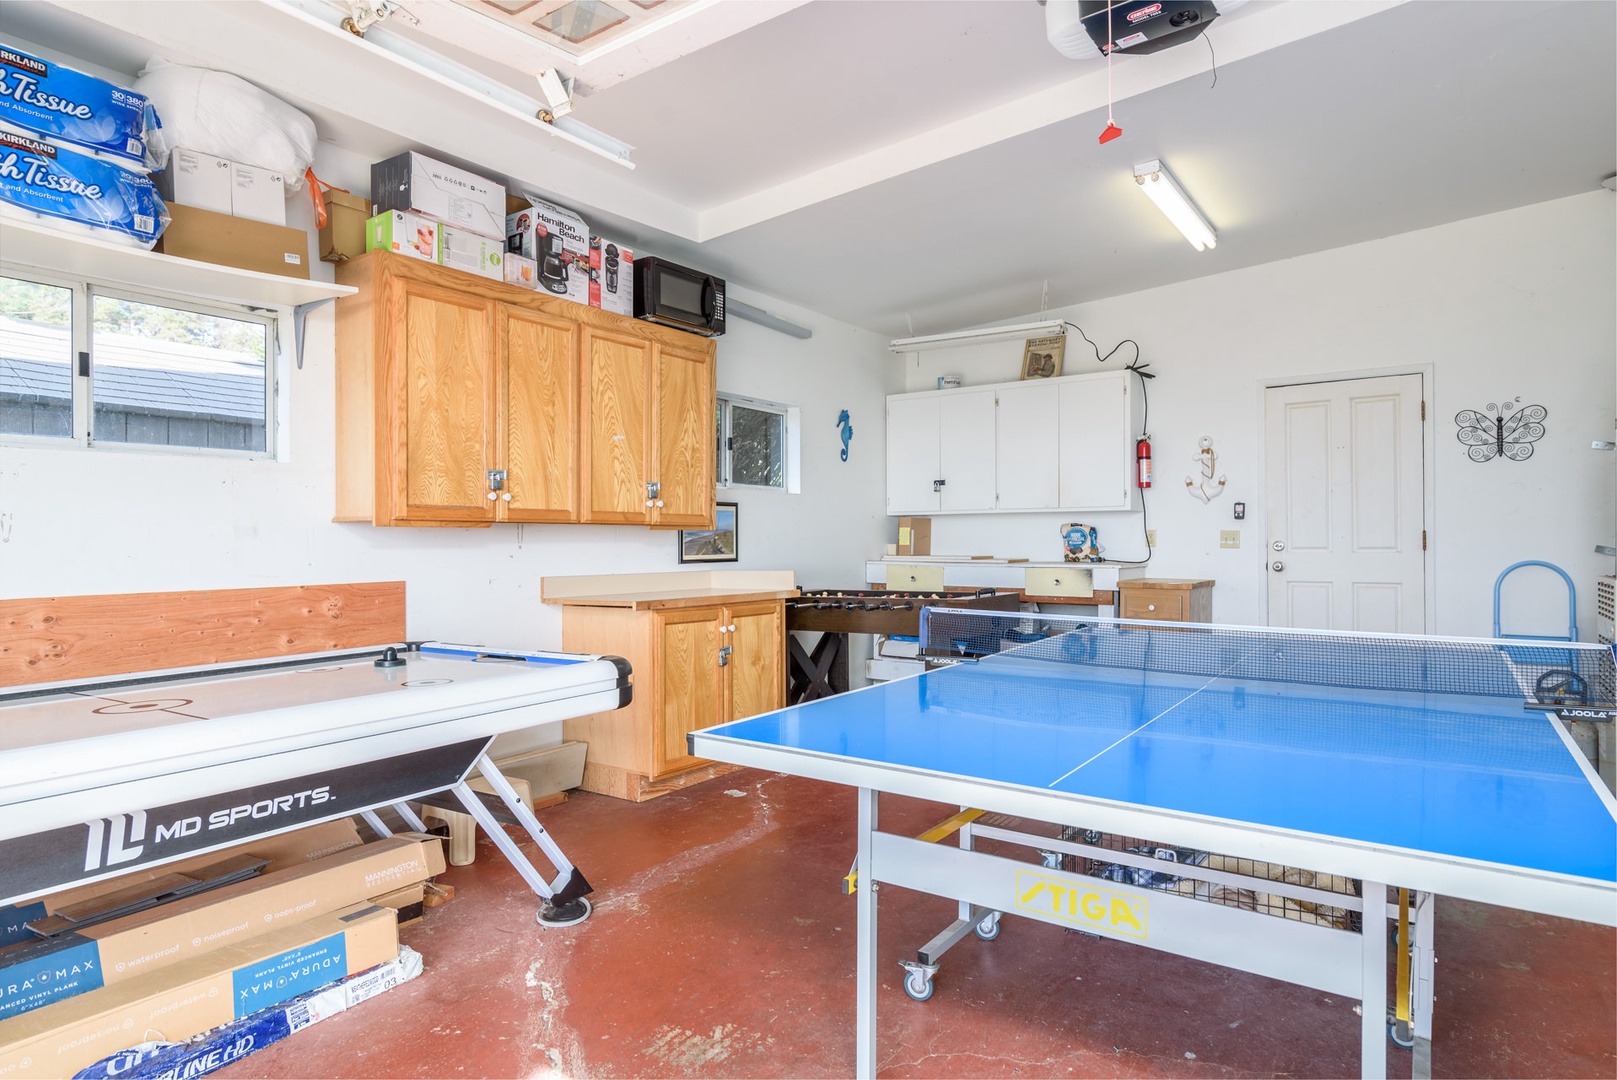 Game room in the garage with ping pong, and air hockey